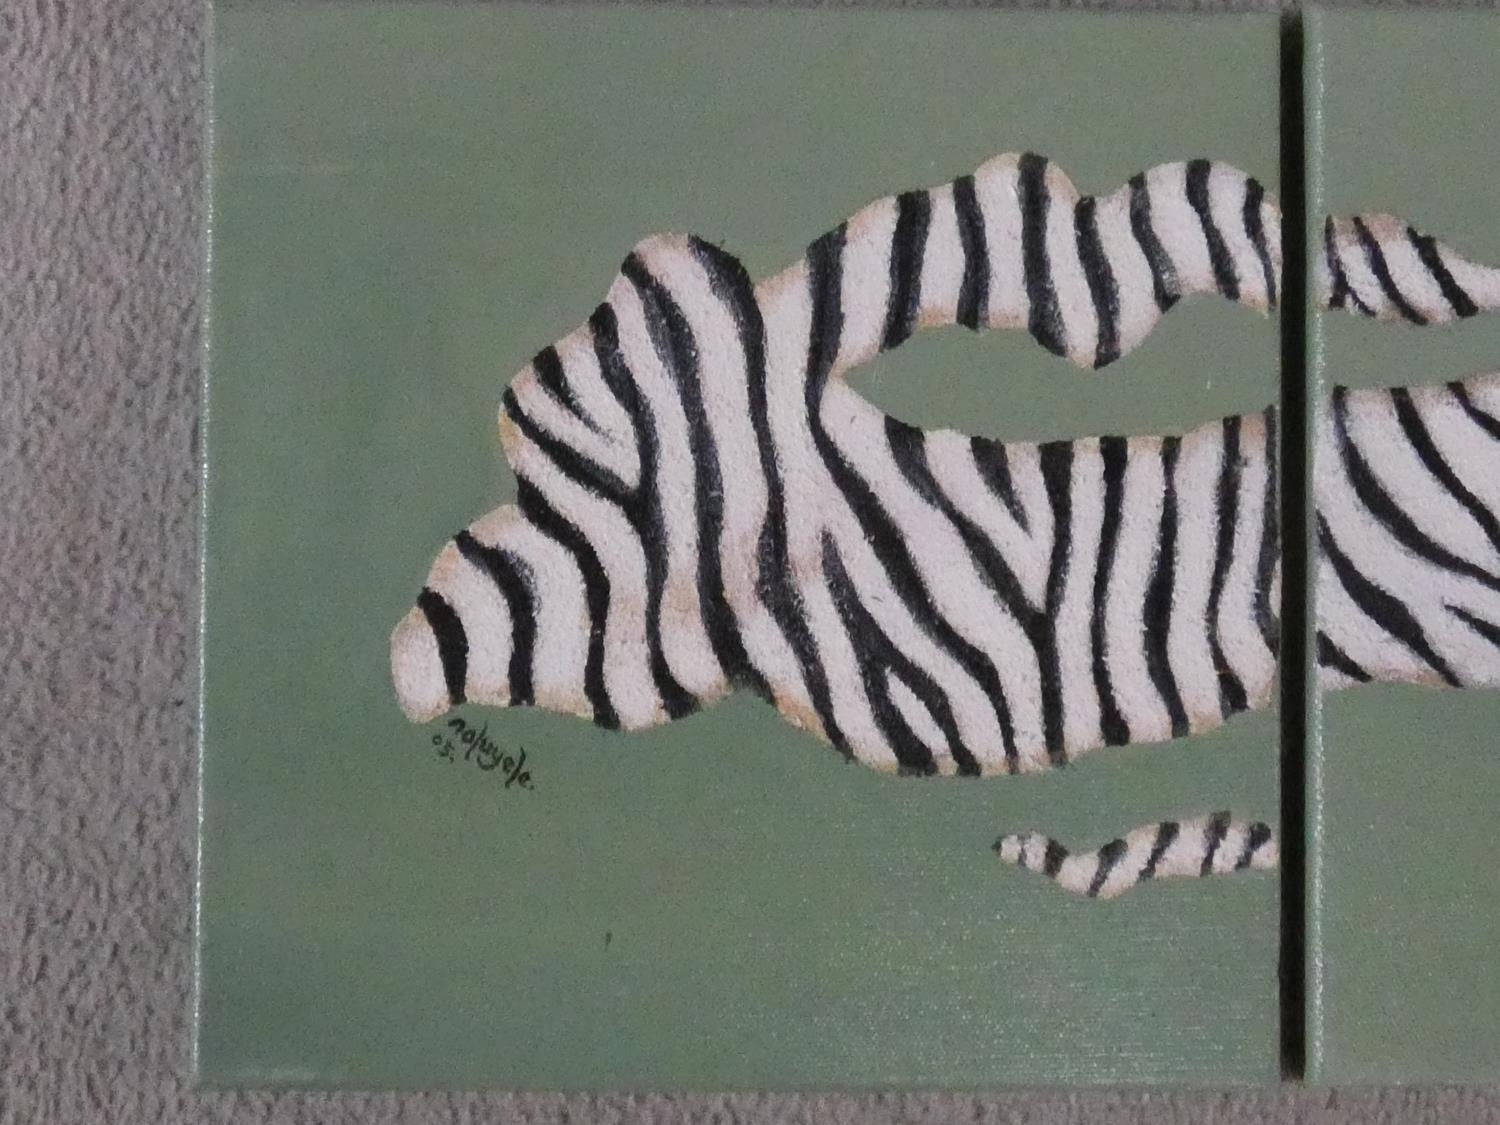 A triptych of three oils on canvas depicting an abstract zebra stripe design, signed Naluyele, 2005. - Image 2 of 5